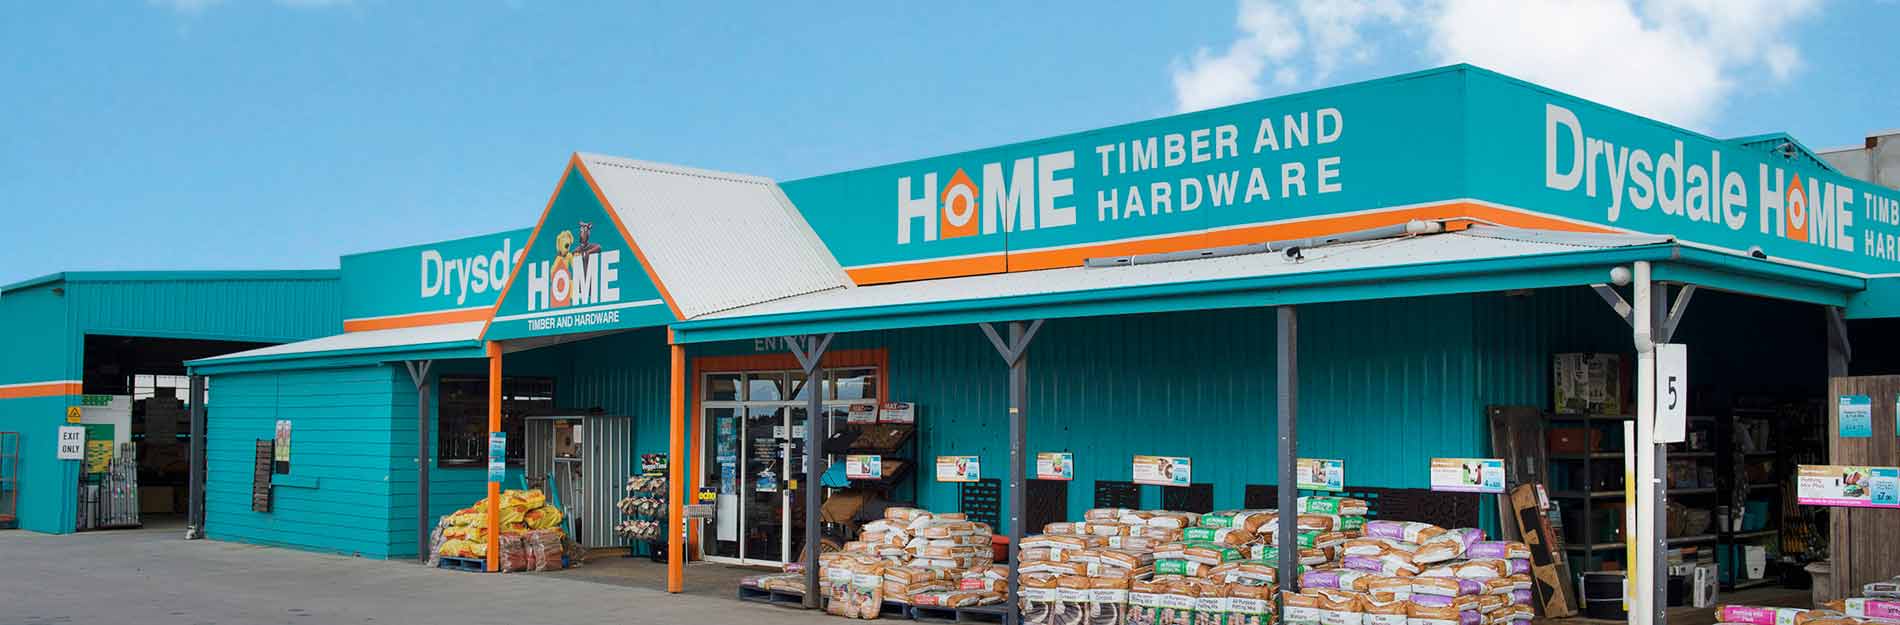 Drysdale Timber and Hardware